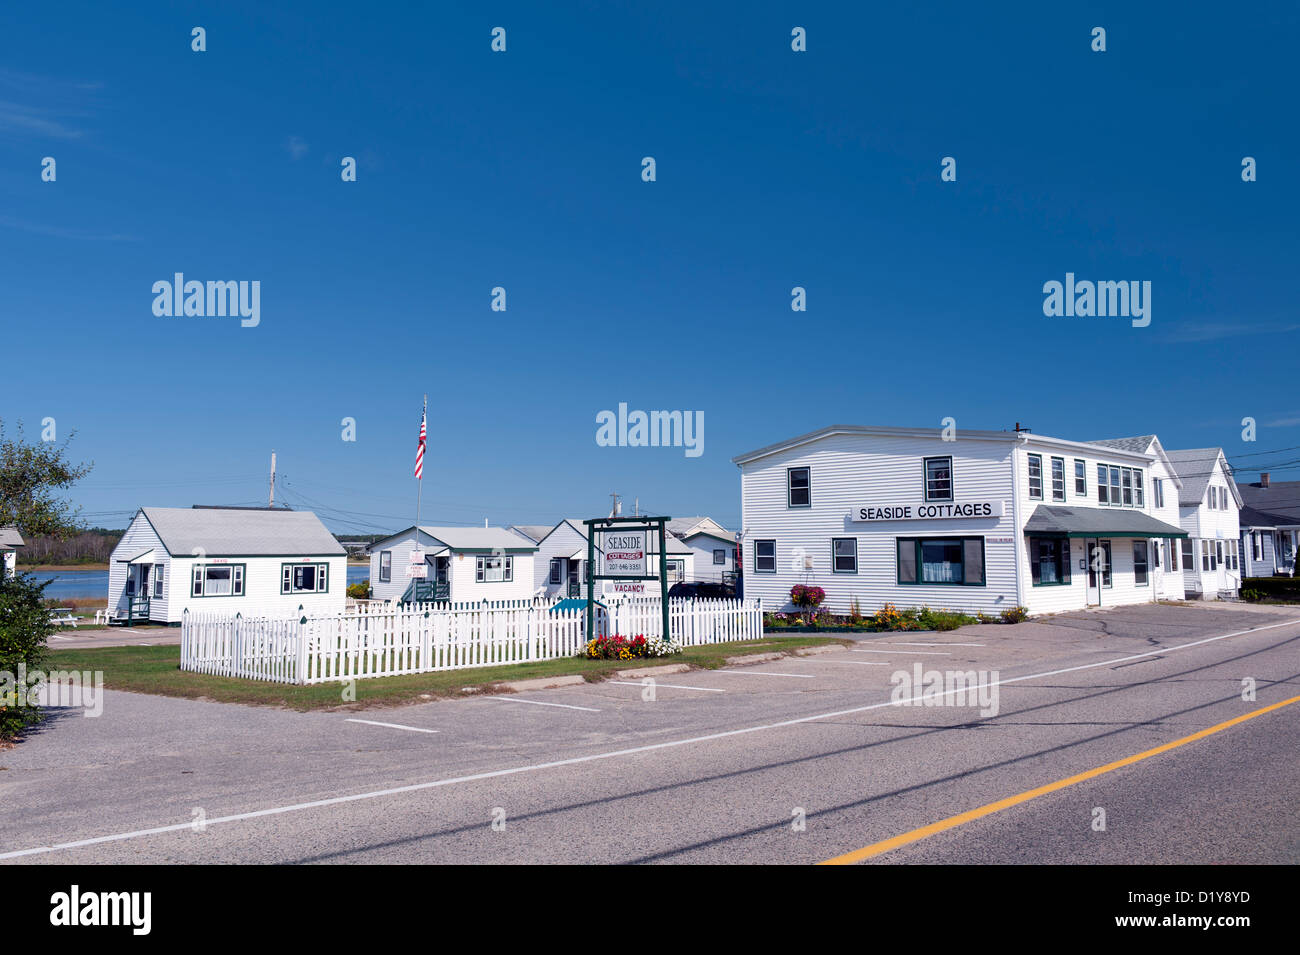 Seaside Cottages Wells Beach Maine Usa Stock Photo 52845505